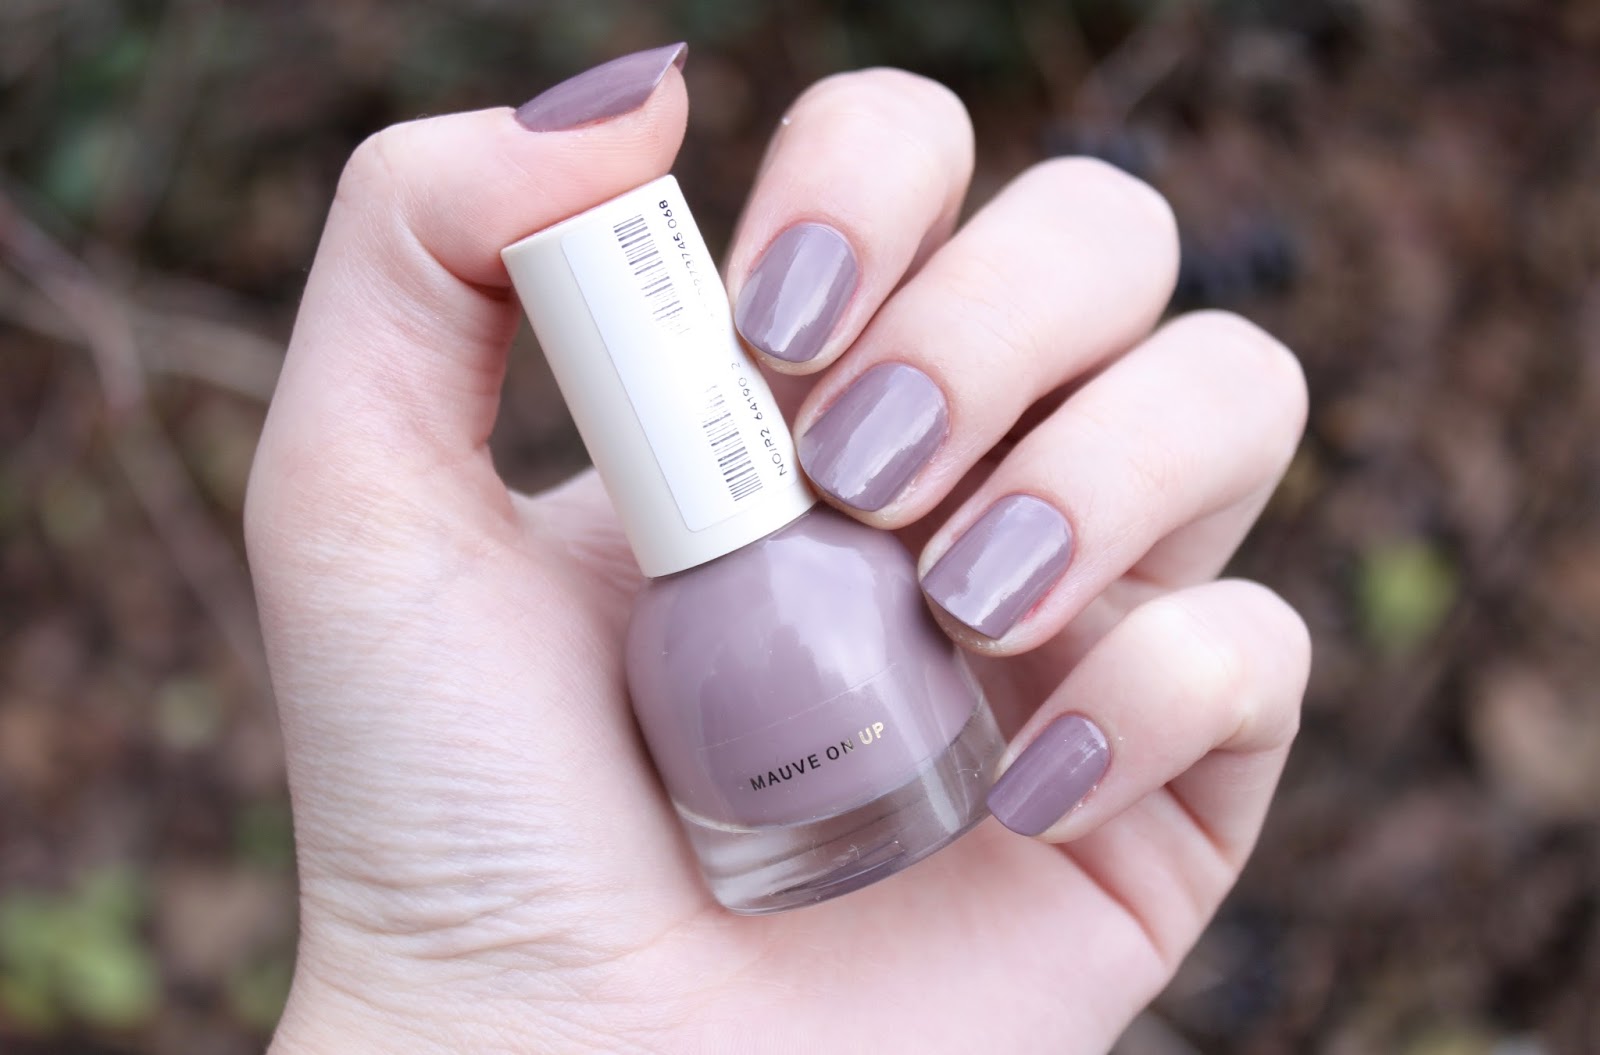 2. "Mauve Over" Nail Polish by OPI - wide 7